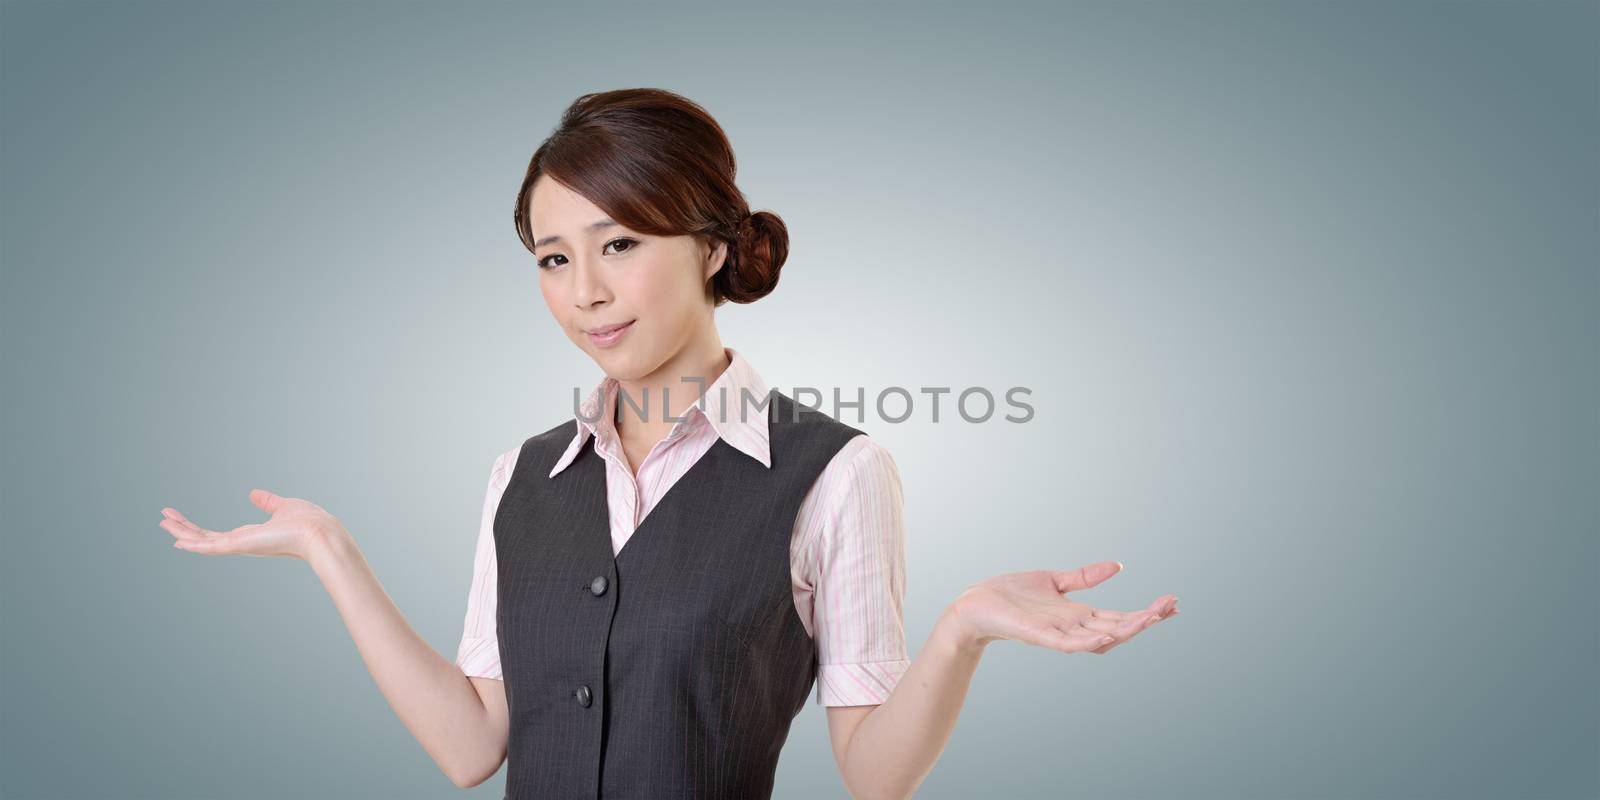 Helpless young business woman shrugs her shoulders. closeup portrait with clipping path.